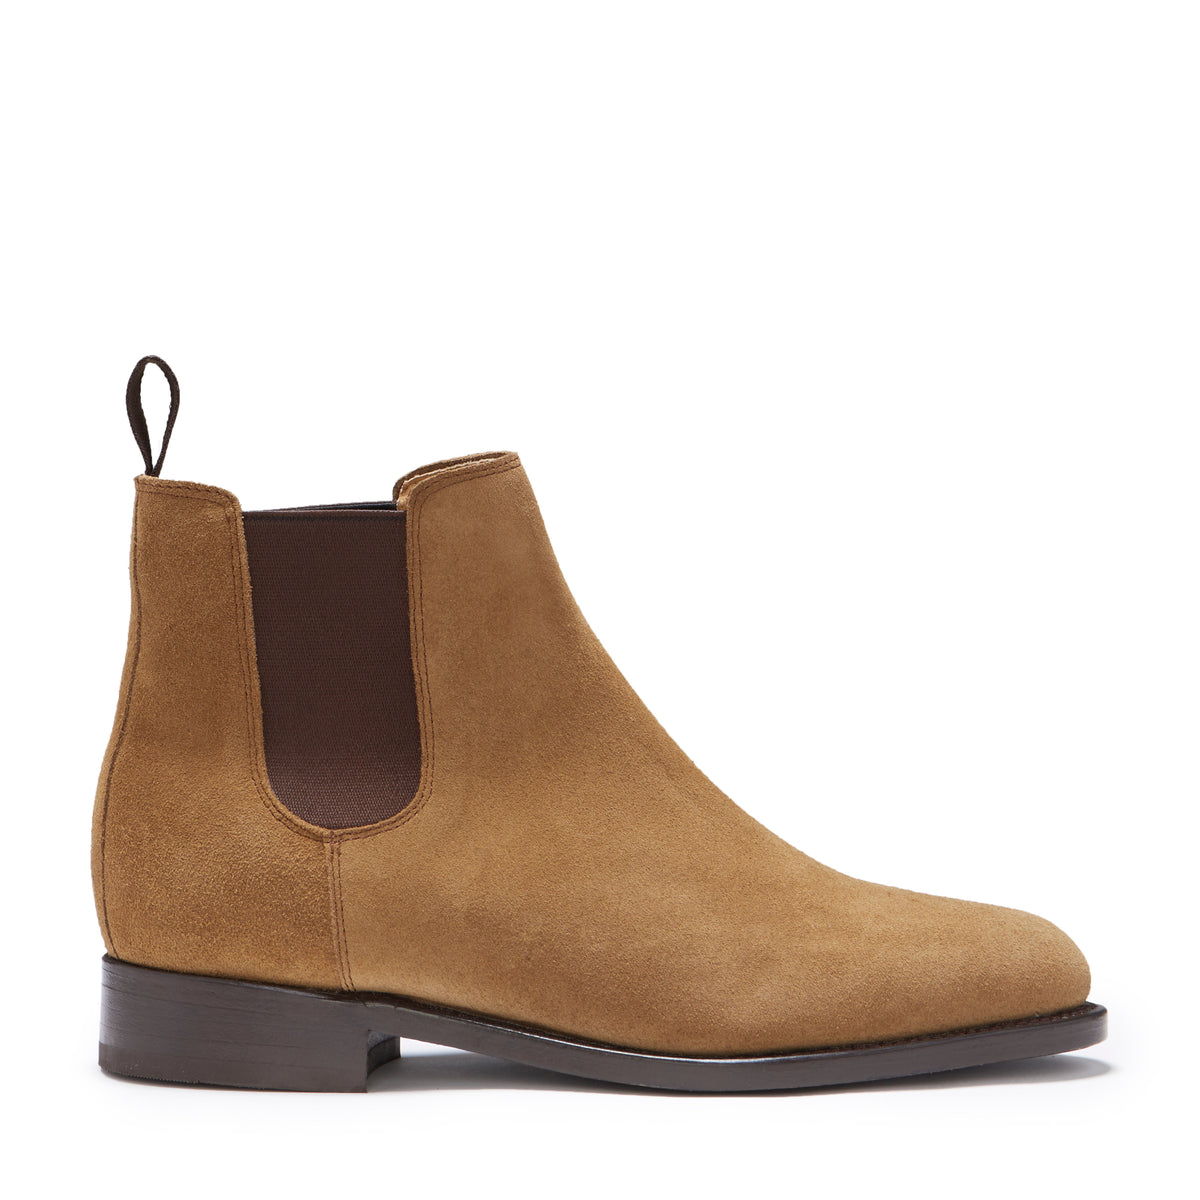 Women's Tobacco Suede Chelsea Boots, Welted Leather Sole - Hugs & Co.